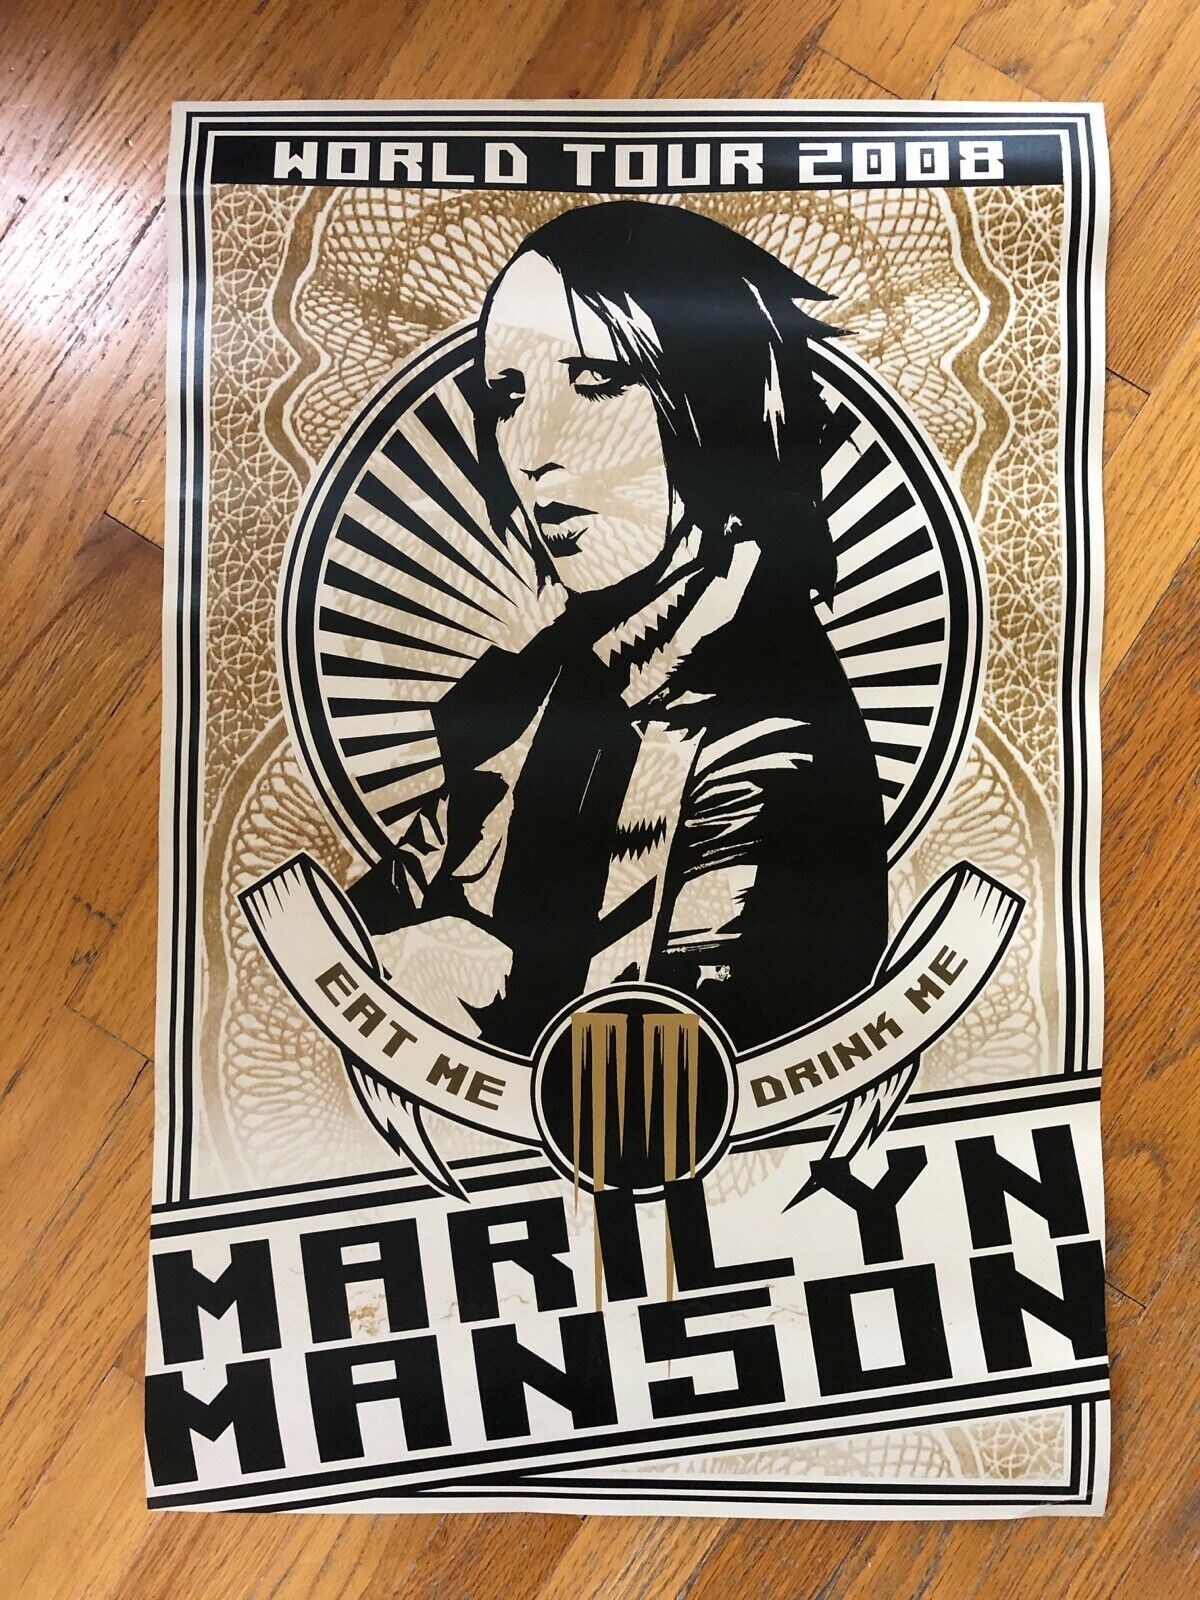 Marilyn Manson 2008 World Tour "eat Me, Drink Me" Poster